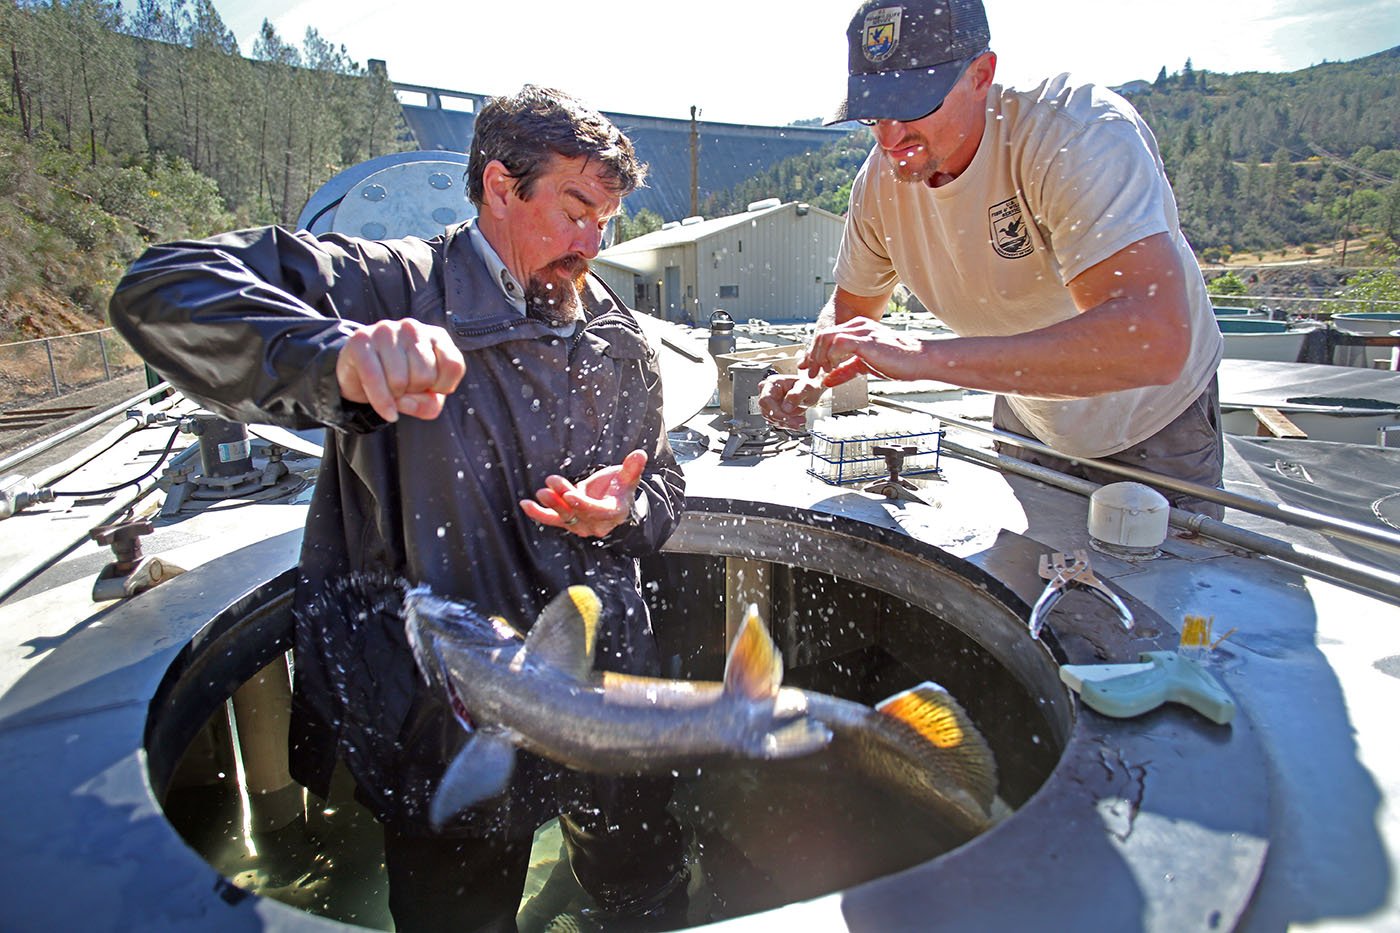  Livingston Stone National Fish Hatchery — Fish culturist Beau Hopkins handles a Chinook salmon from the top of a truck with a holding tank. A sample is taken for genetic analysis to help with breeding of the winter-run population. June 10, 2022. Tom